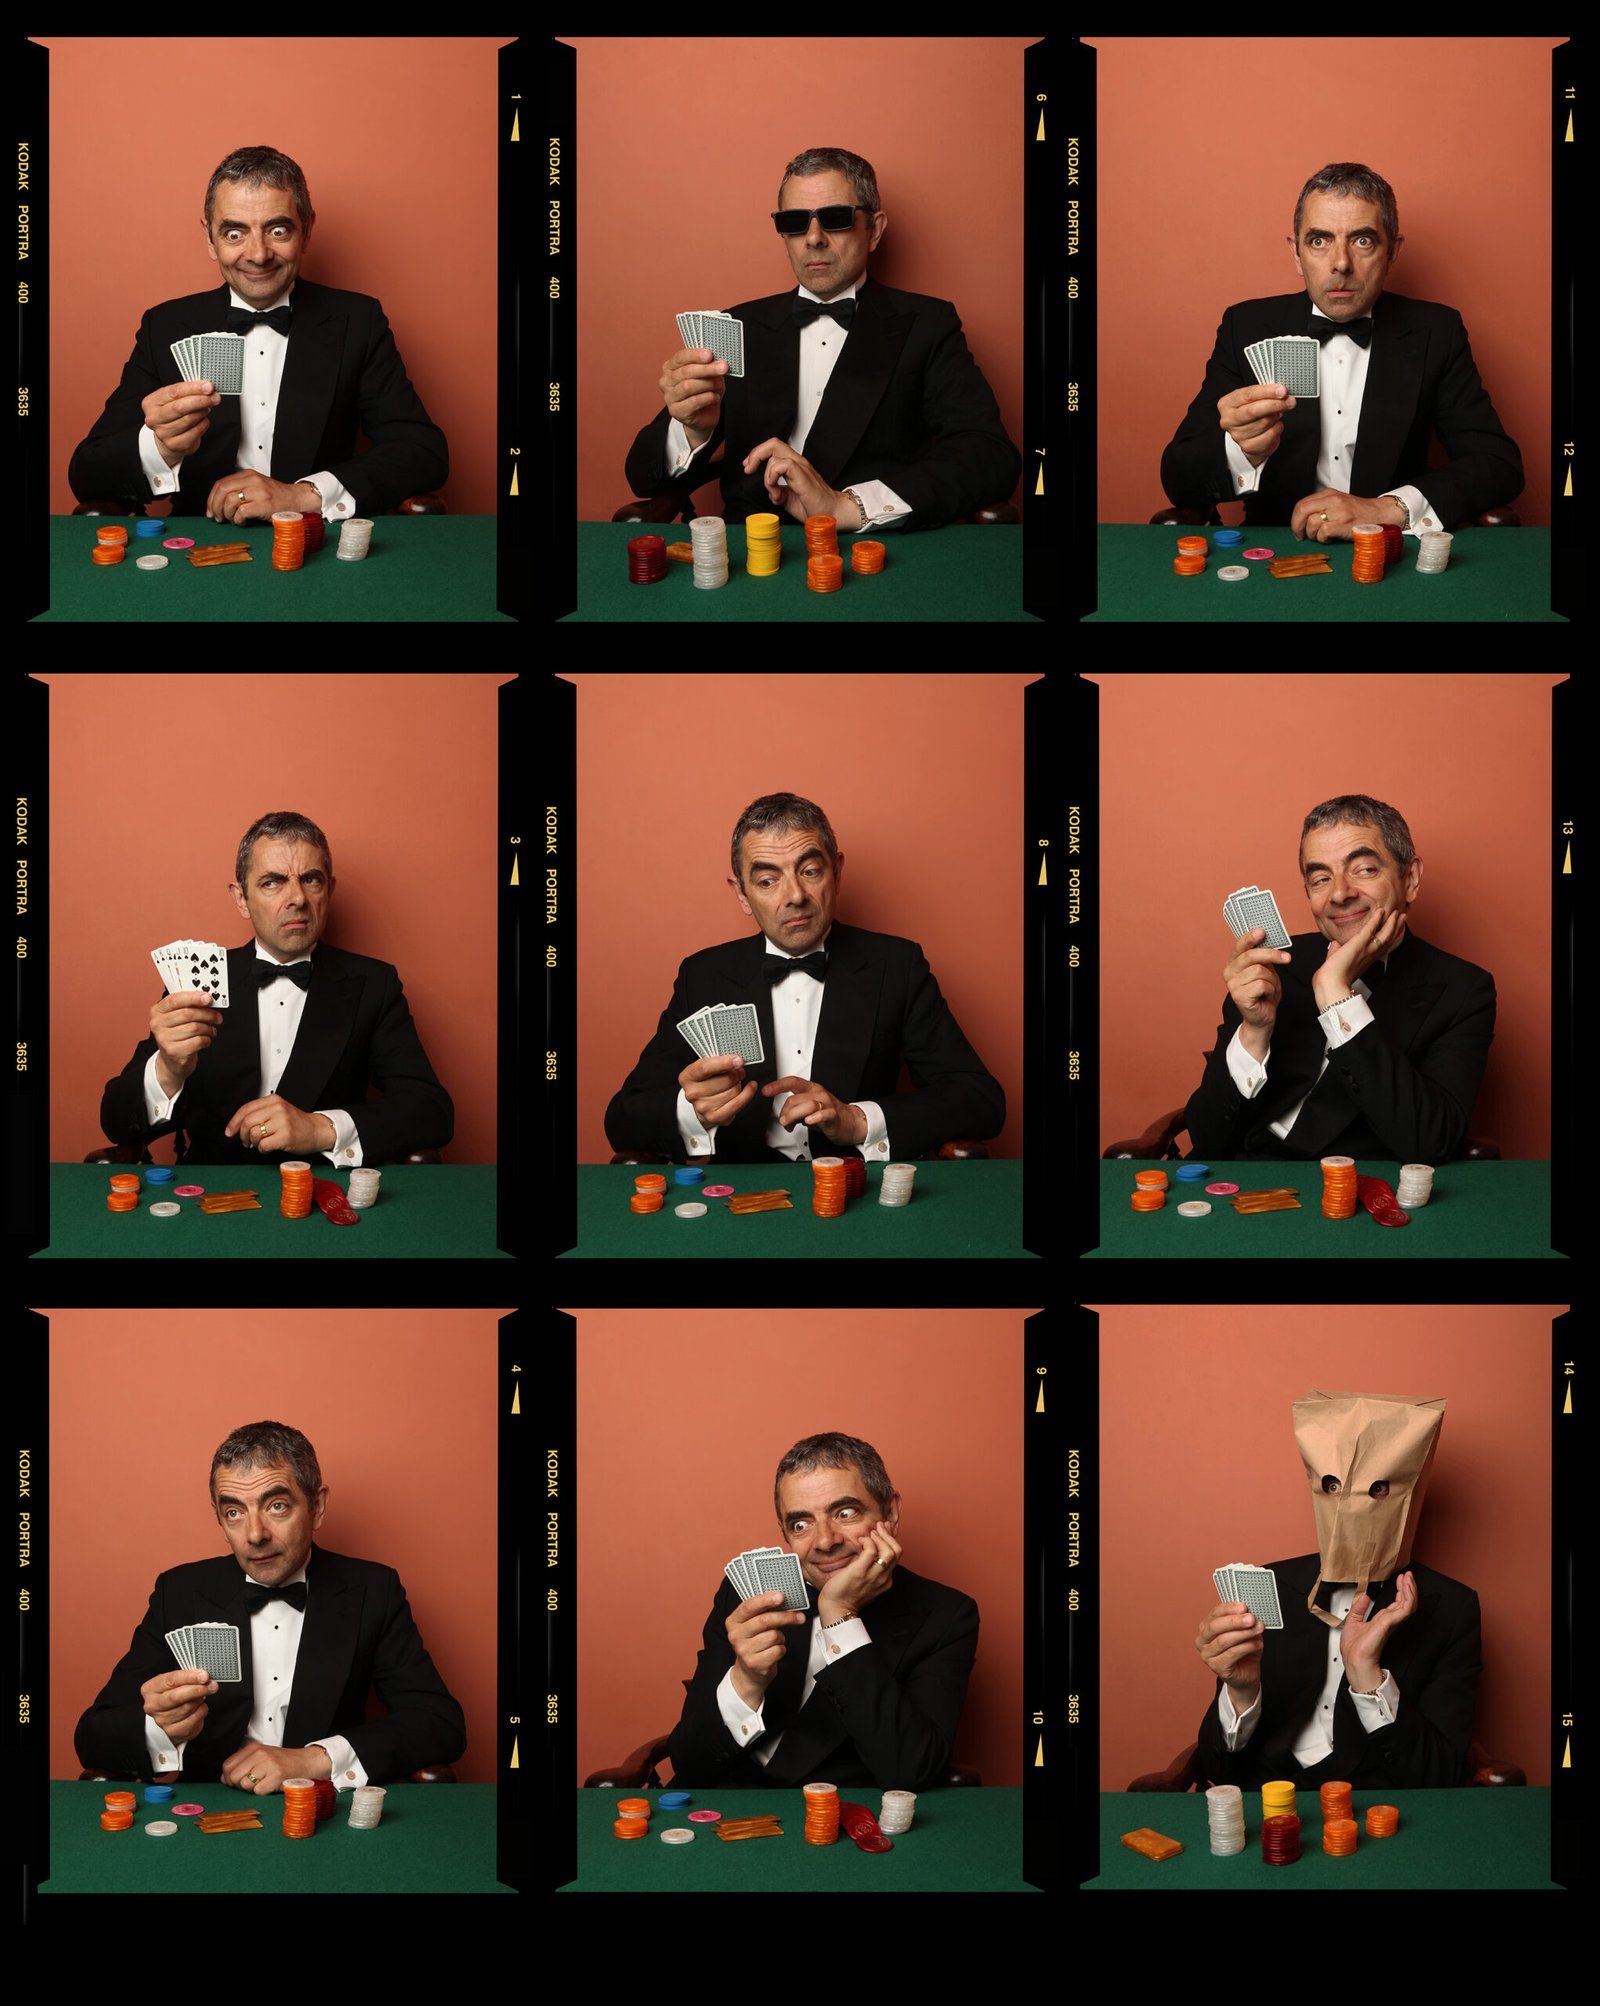 Comedian, Rowan Atkinson, appears 9 times in this image, making funny faces and holding playing cards.